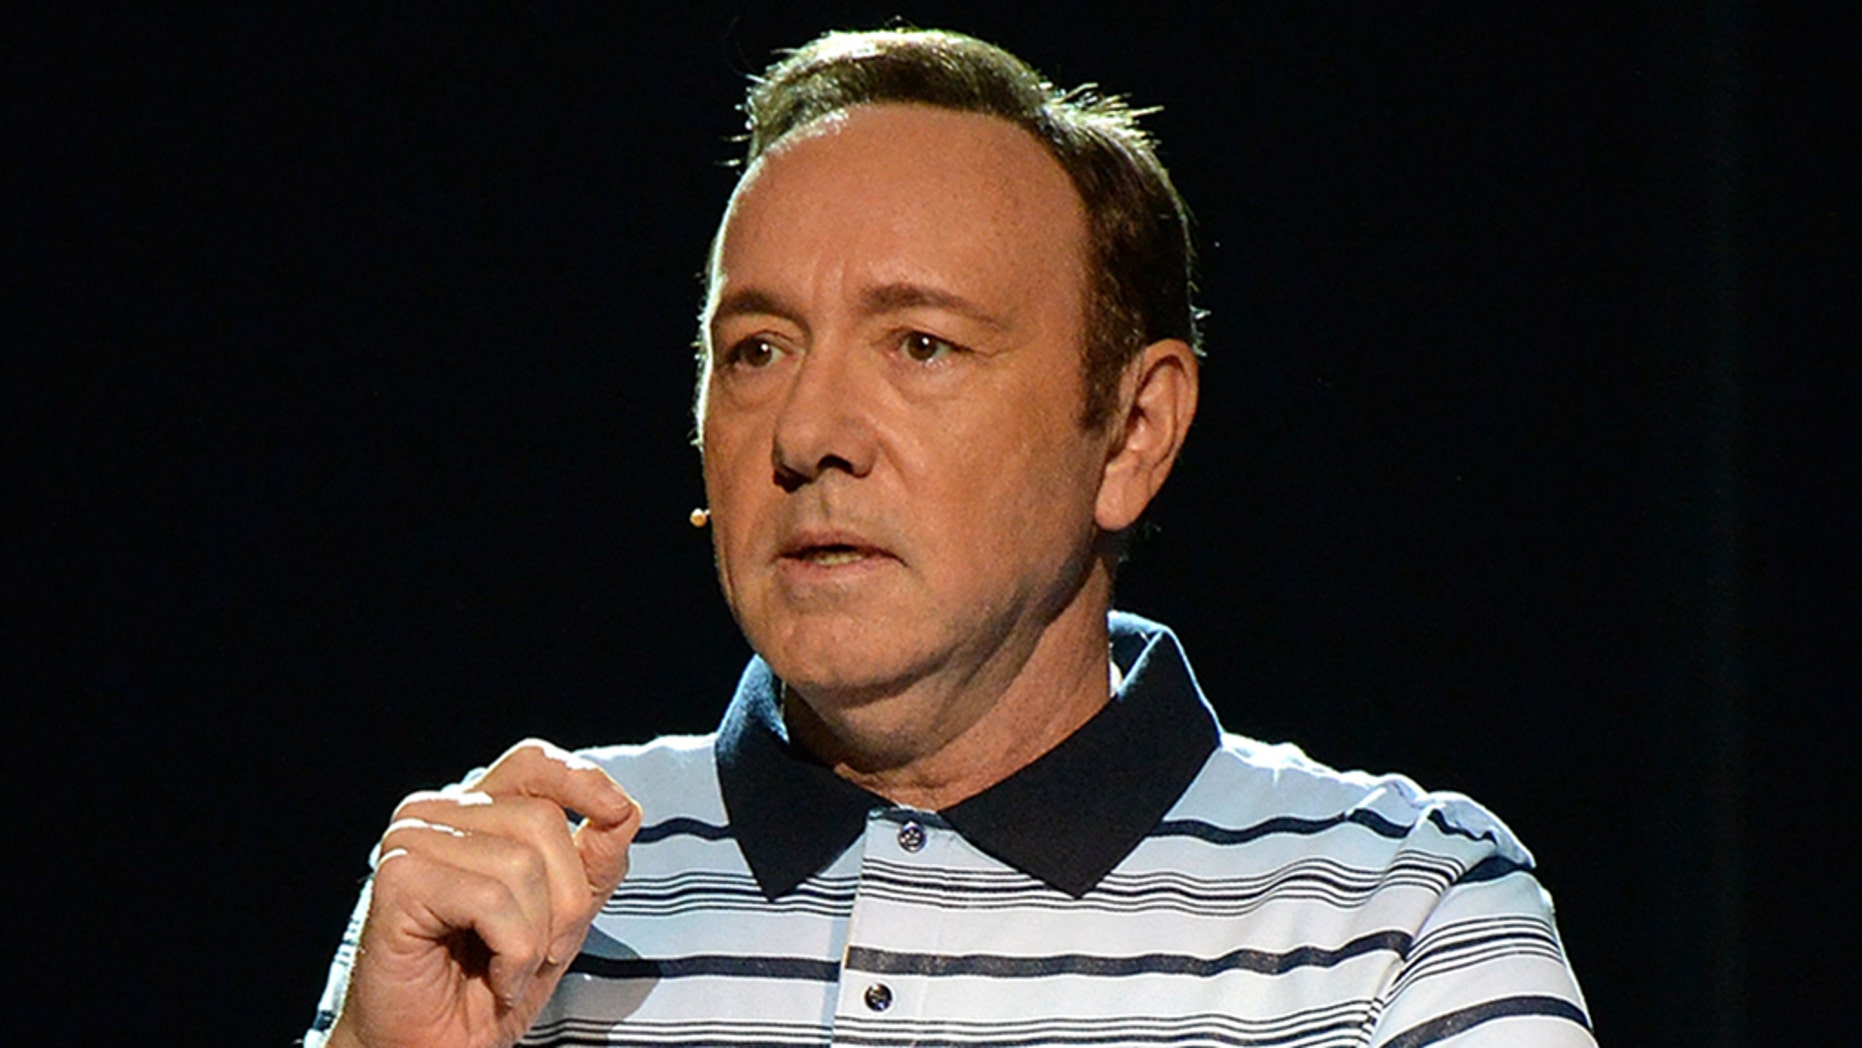 Judge says no to Kevin Spacey